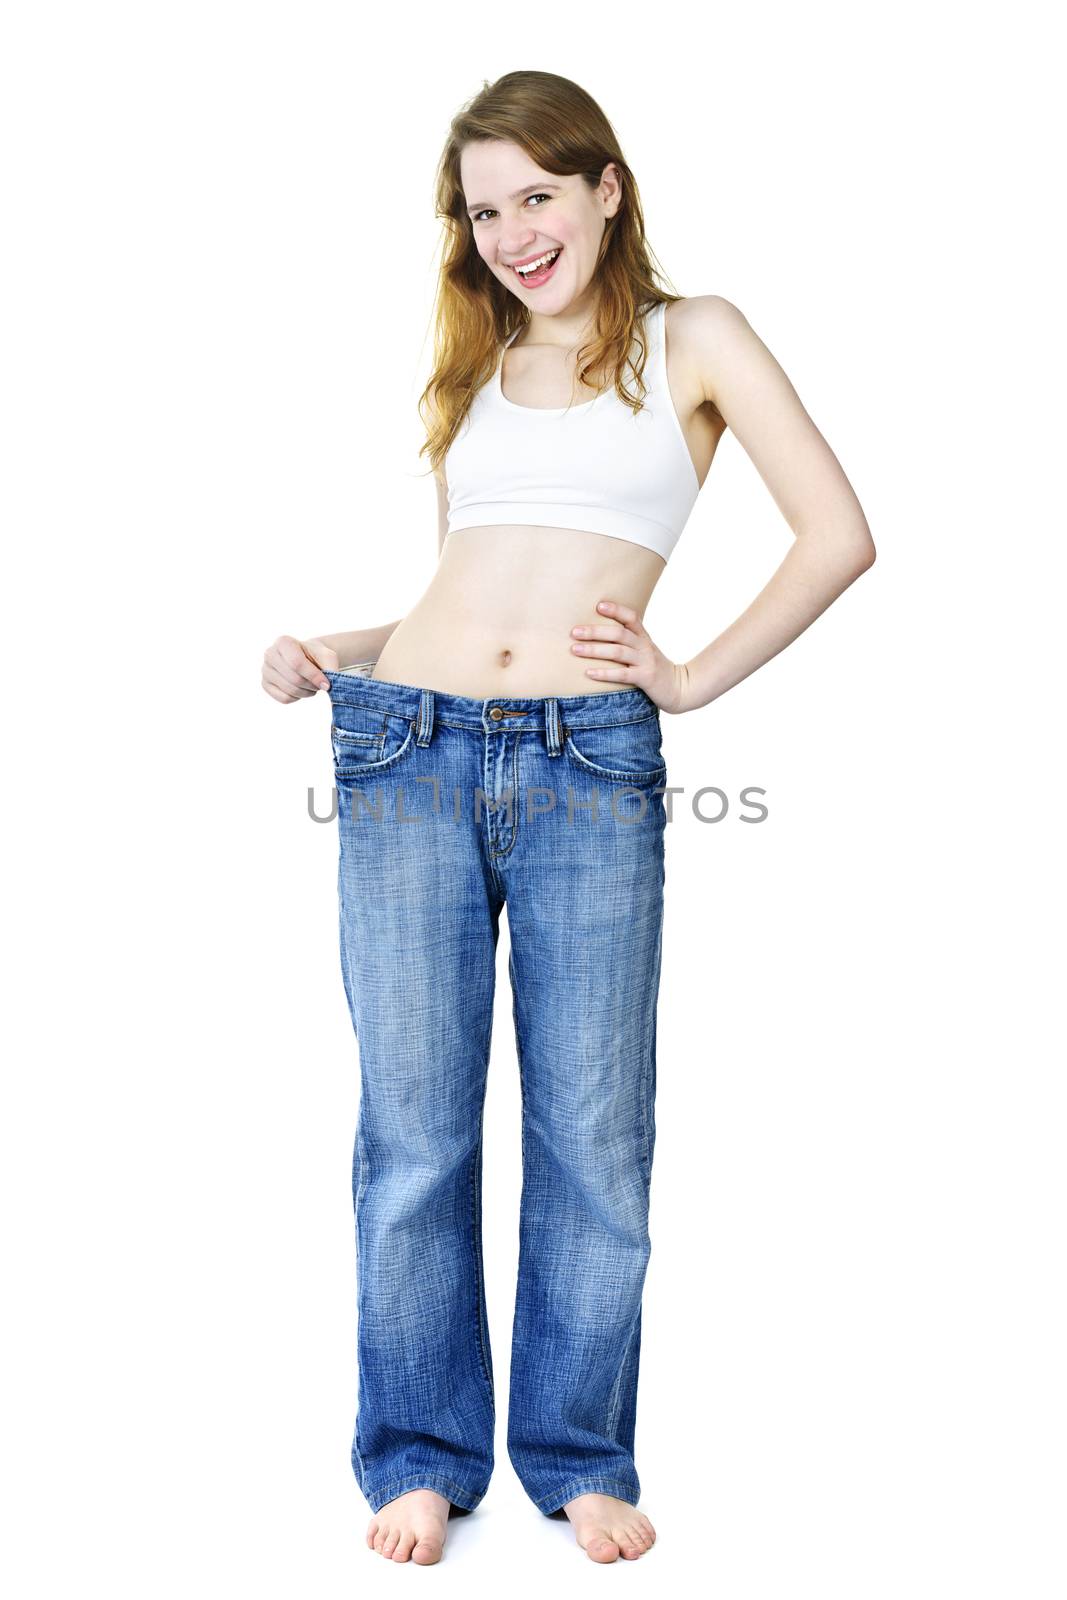 Happy fit young woman in loose old jeans after losing weight isolated on white